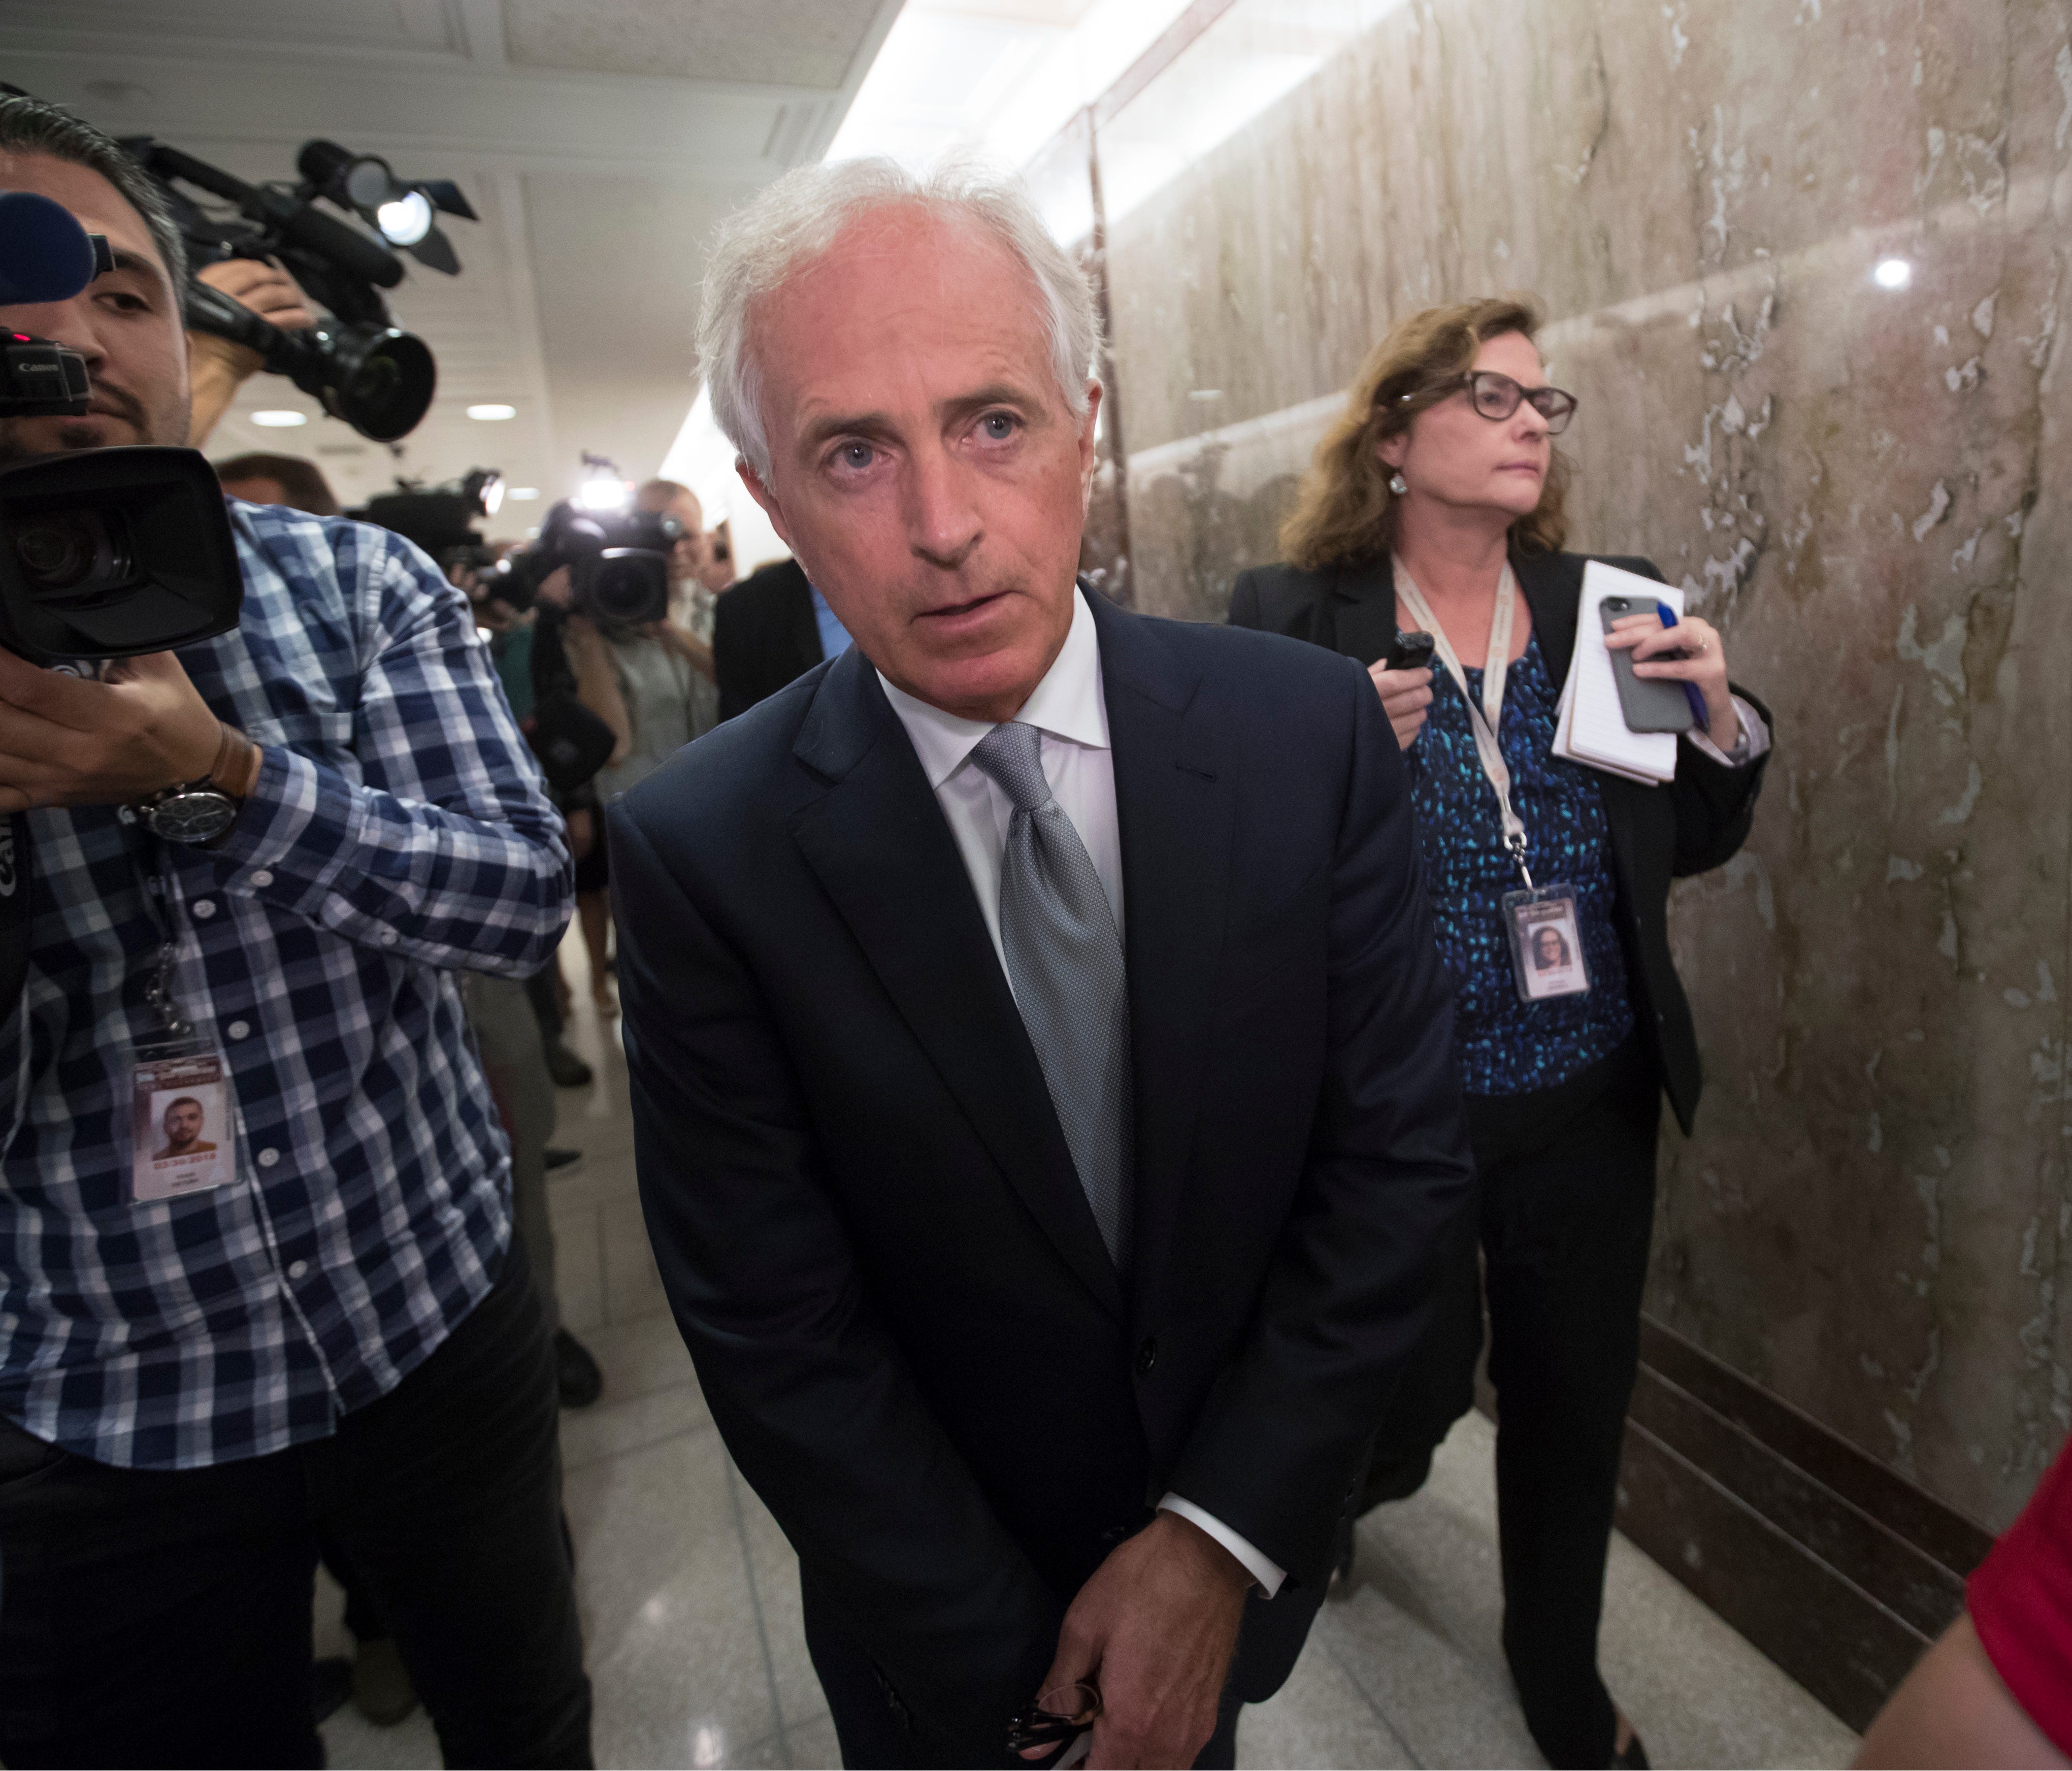 Senate Foreign Relations Committee Chairman Sen. Bob Corker, R-Tenn., walks on Capitol Hill after talking to reporters about President Donald Trump, Tuesday, Oct. 24, 2017, in Washington. (AP Photo/J. Scott Applewhite)